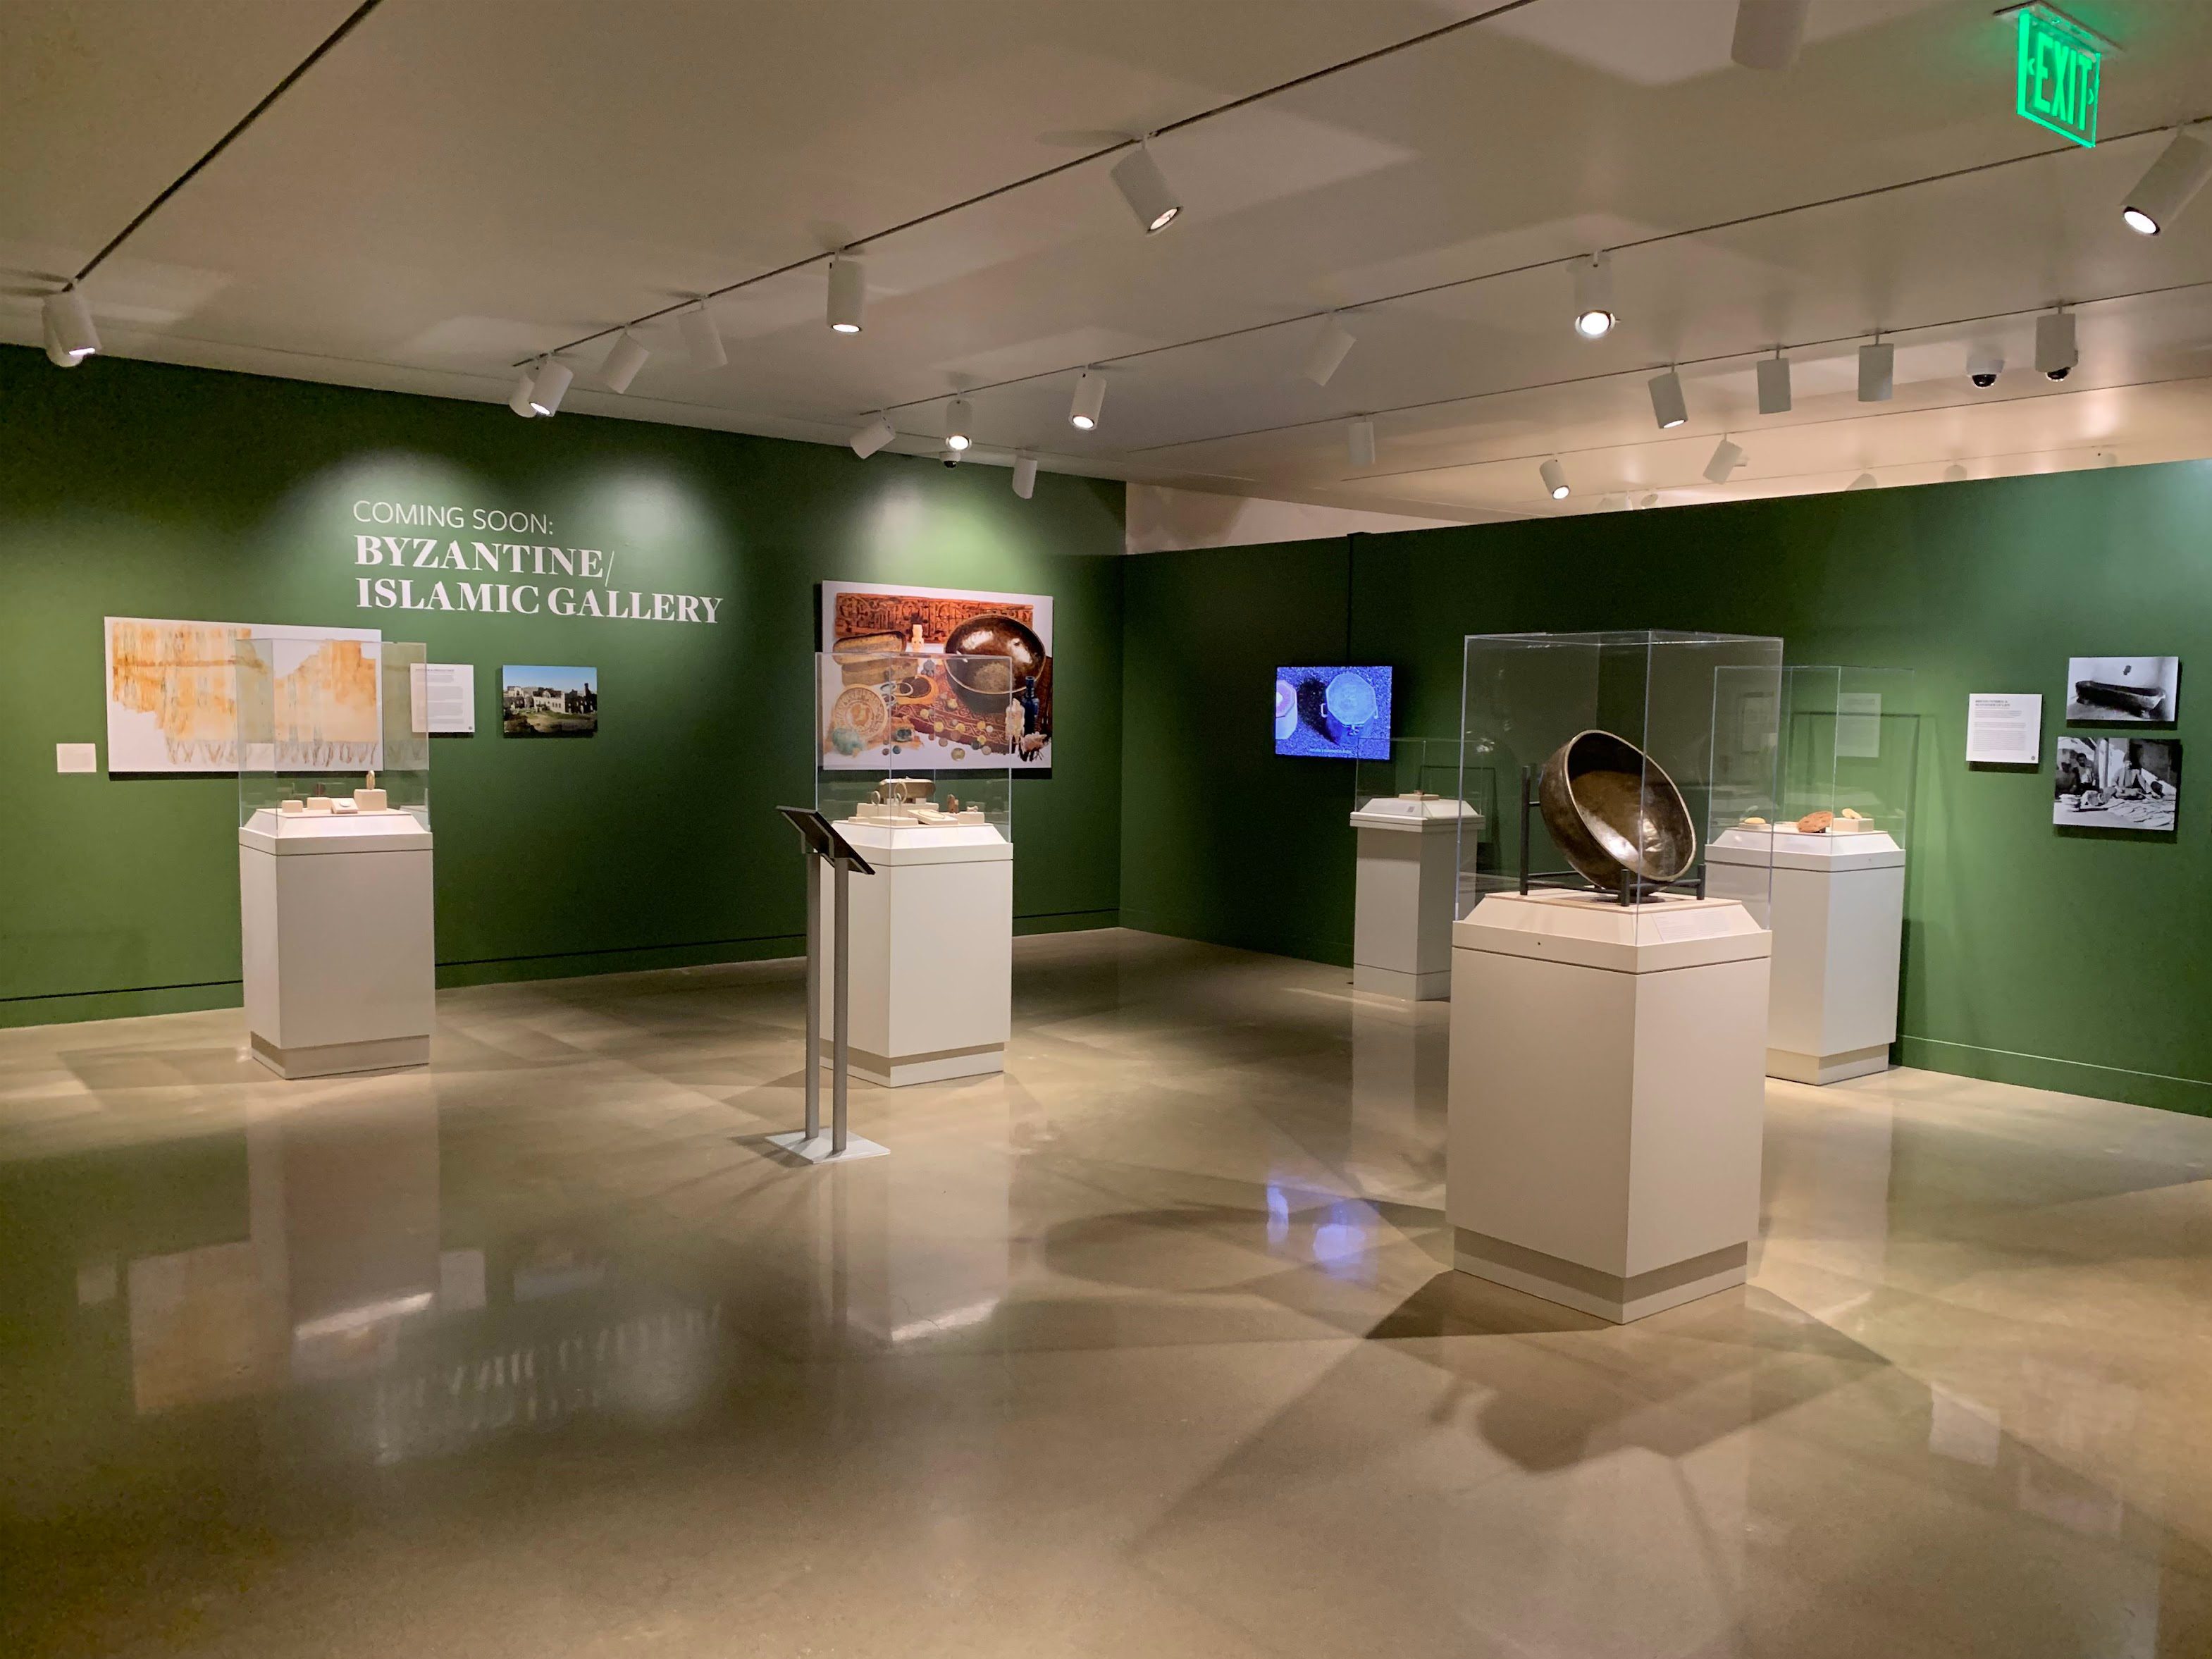 Museum gallery space with five vitrines containing artifacts. Hanging on the walls are photos, including that of a textile and an assemblage of artifacts, as well as a TV showing a video. Text on the wall reads, “Coming Soon: Byzantine/Islamic Gallery.”